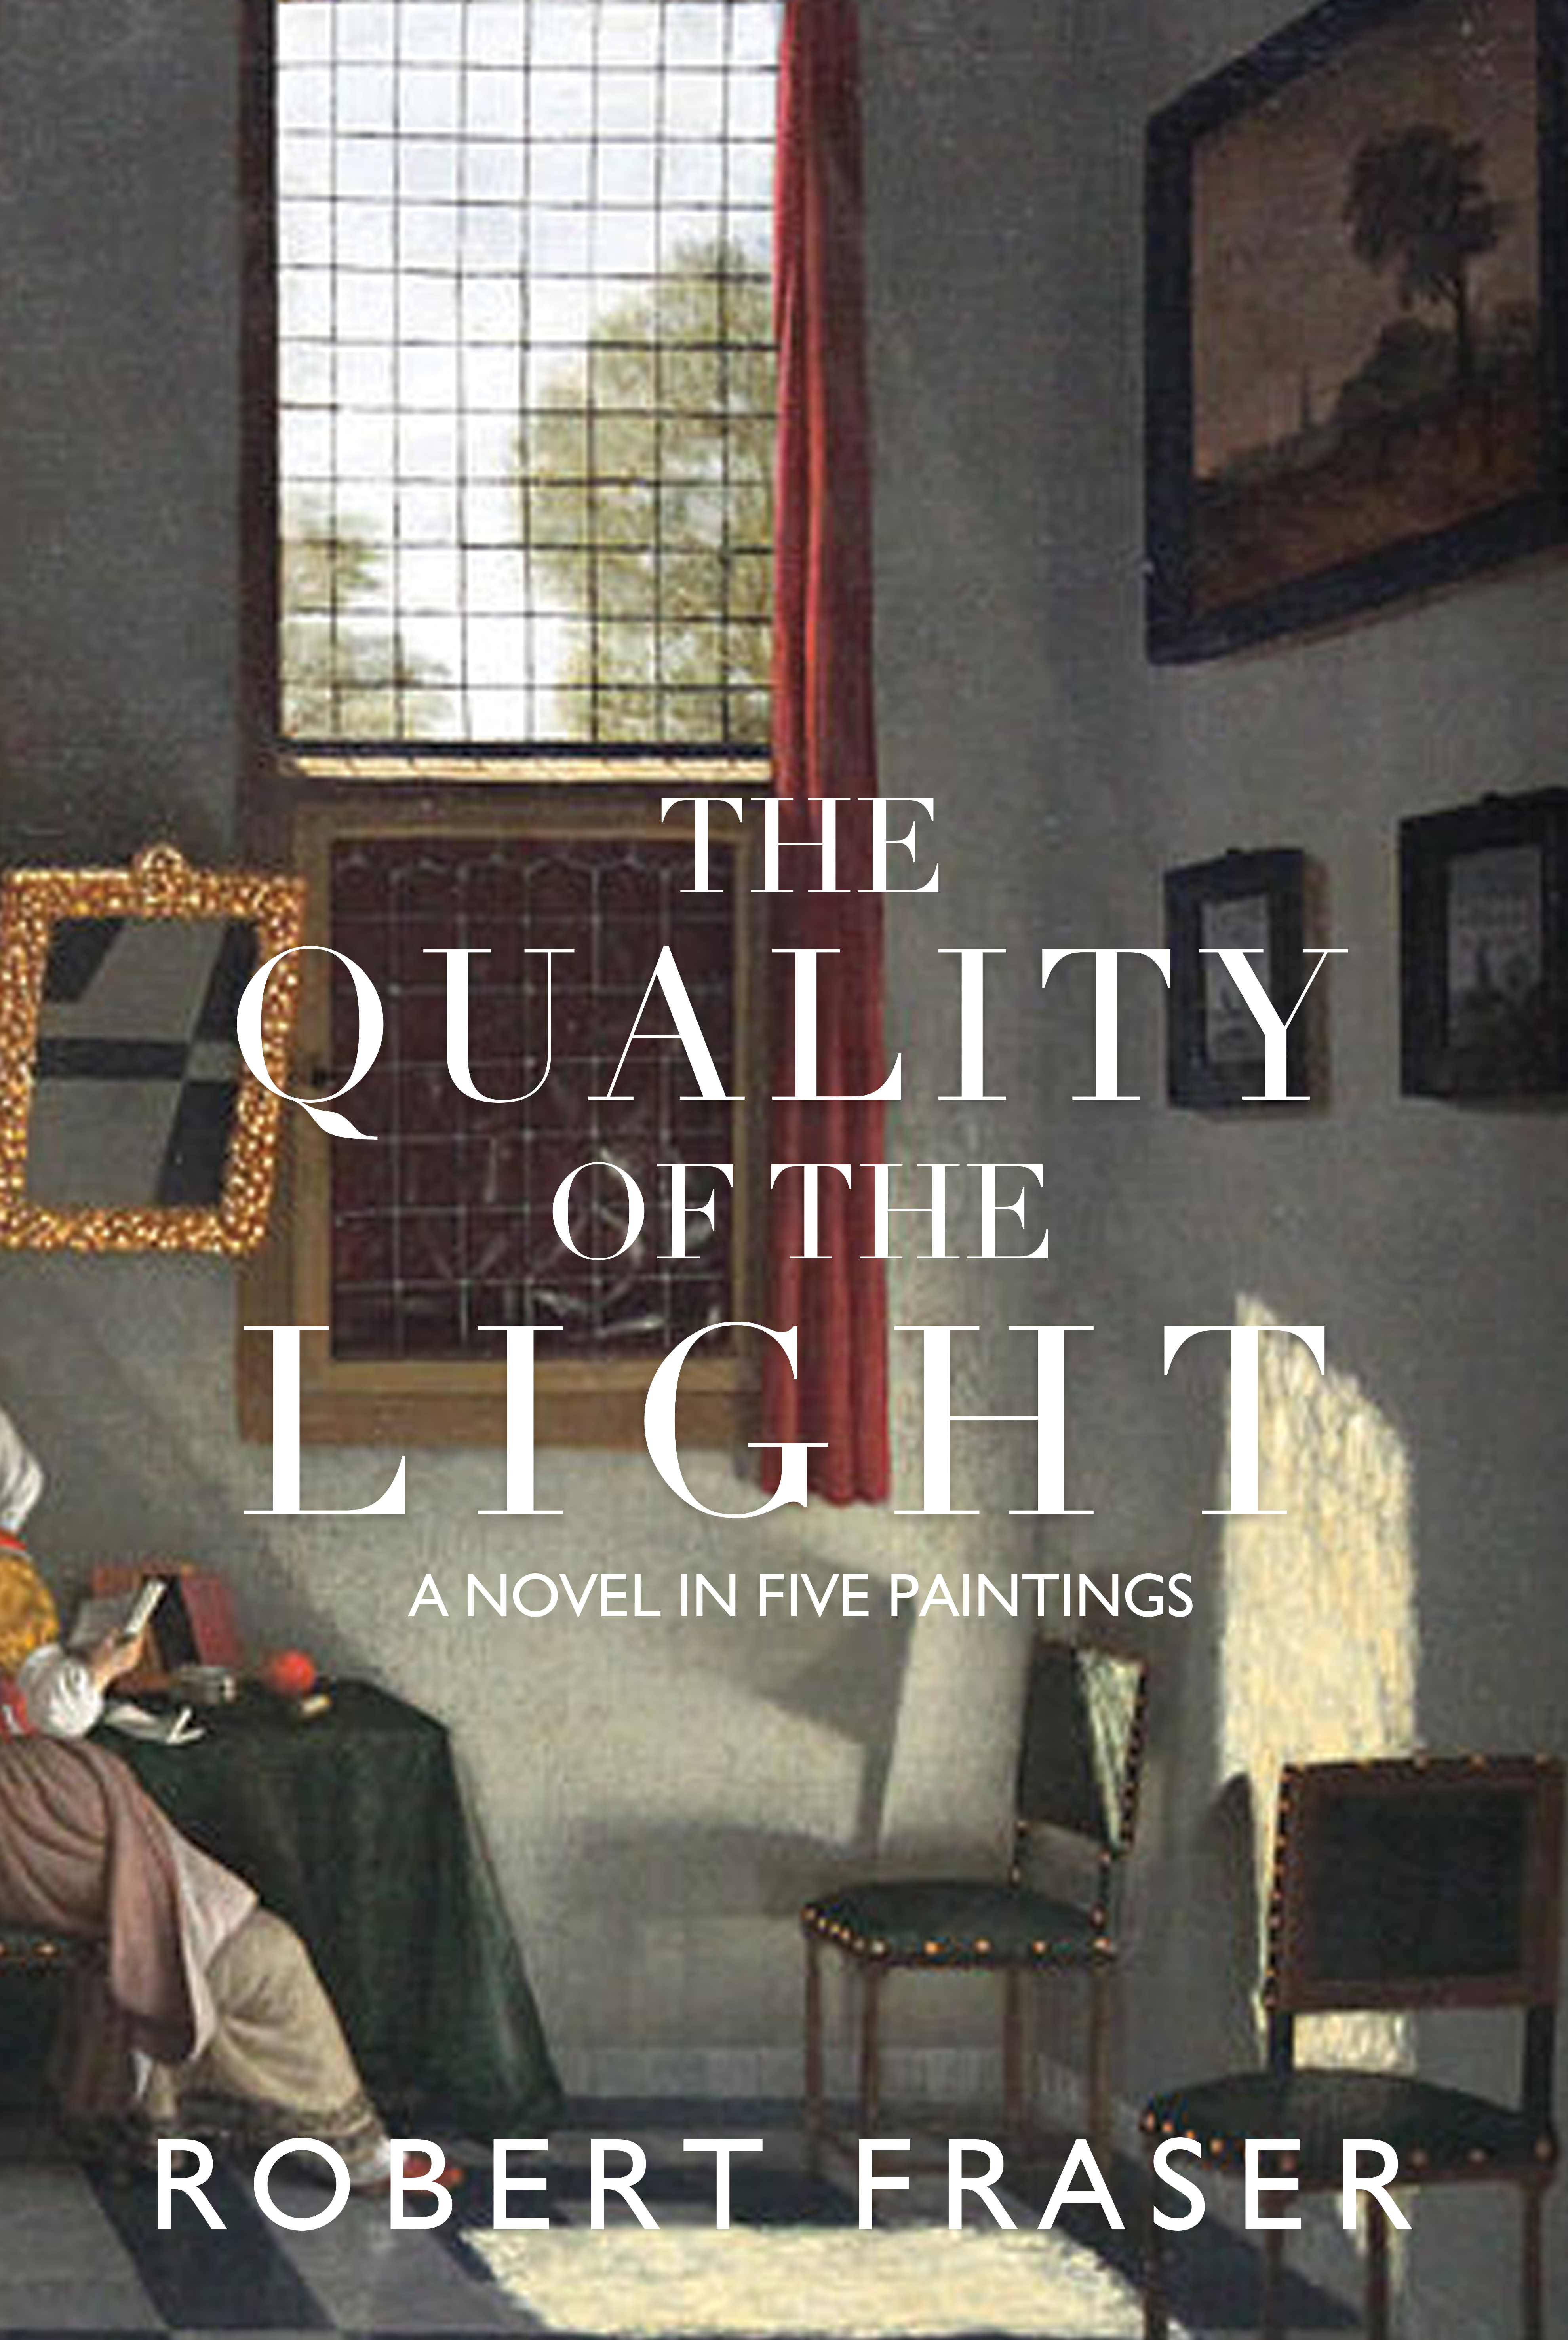 The Quality of the Light: Profound Novel Sees Art & Reality Collide, as Deception & Truth Unravel